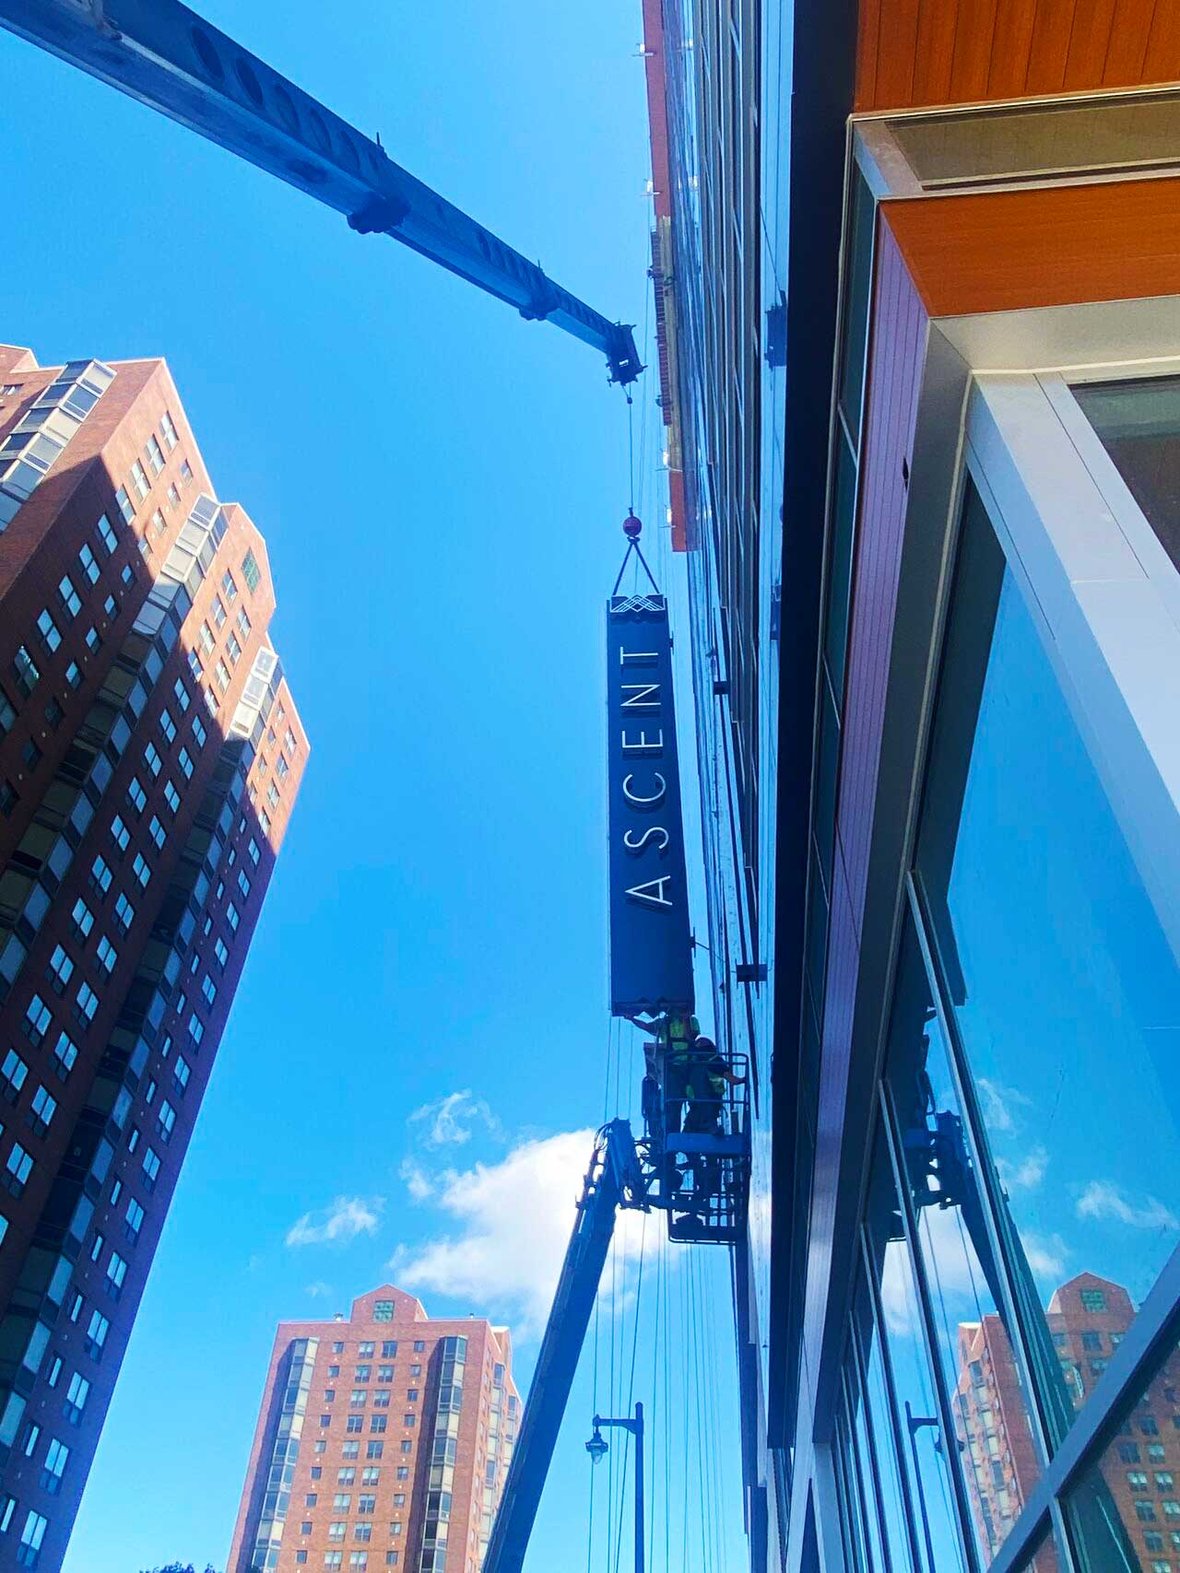 Signage going up for Ascent luxury apartment mass timber high-rise in Milwaukee, Wisconsin